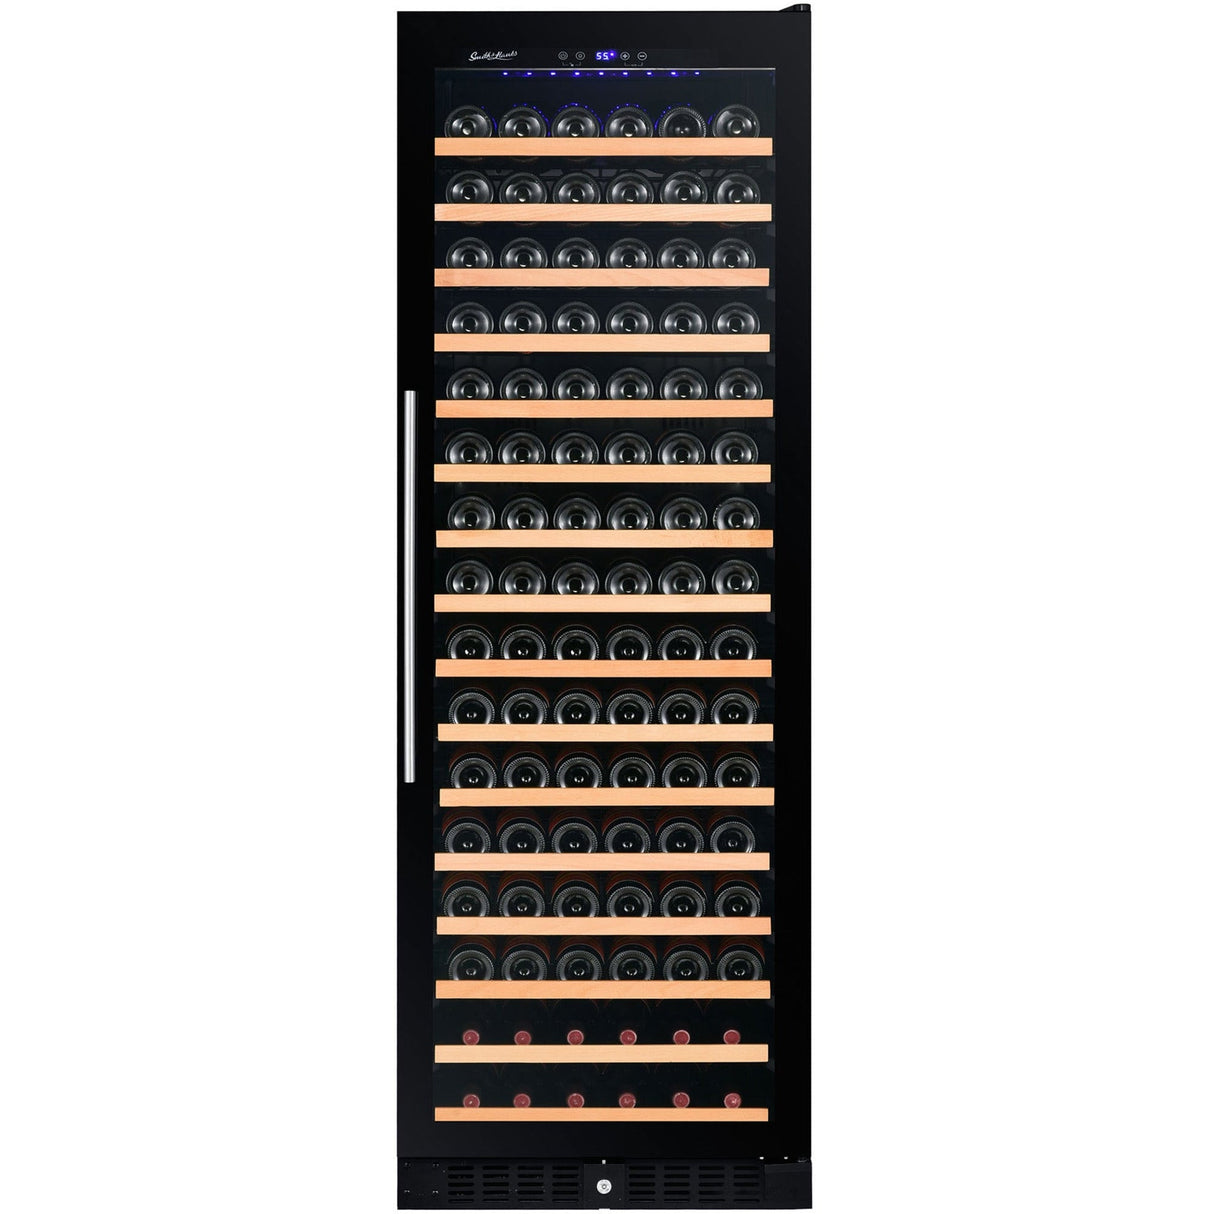 Smith and Hanks RW428SRG 166 Bottle Single Zone Wine Cooler - RE100014